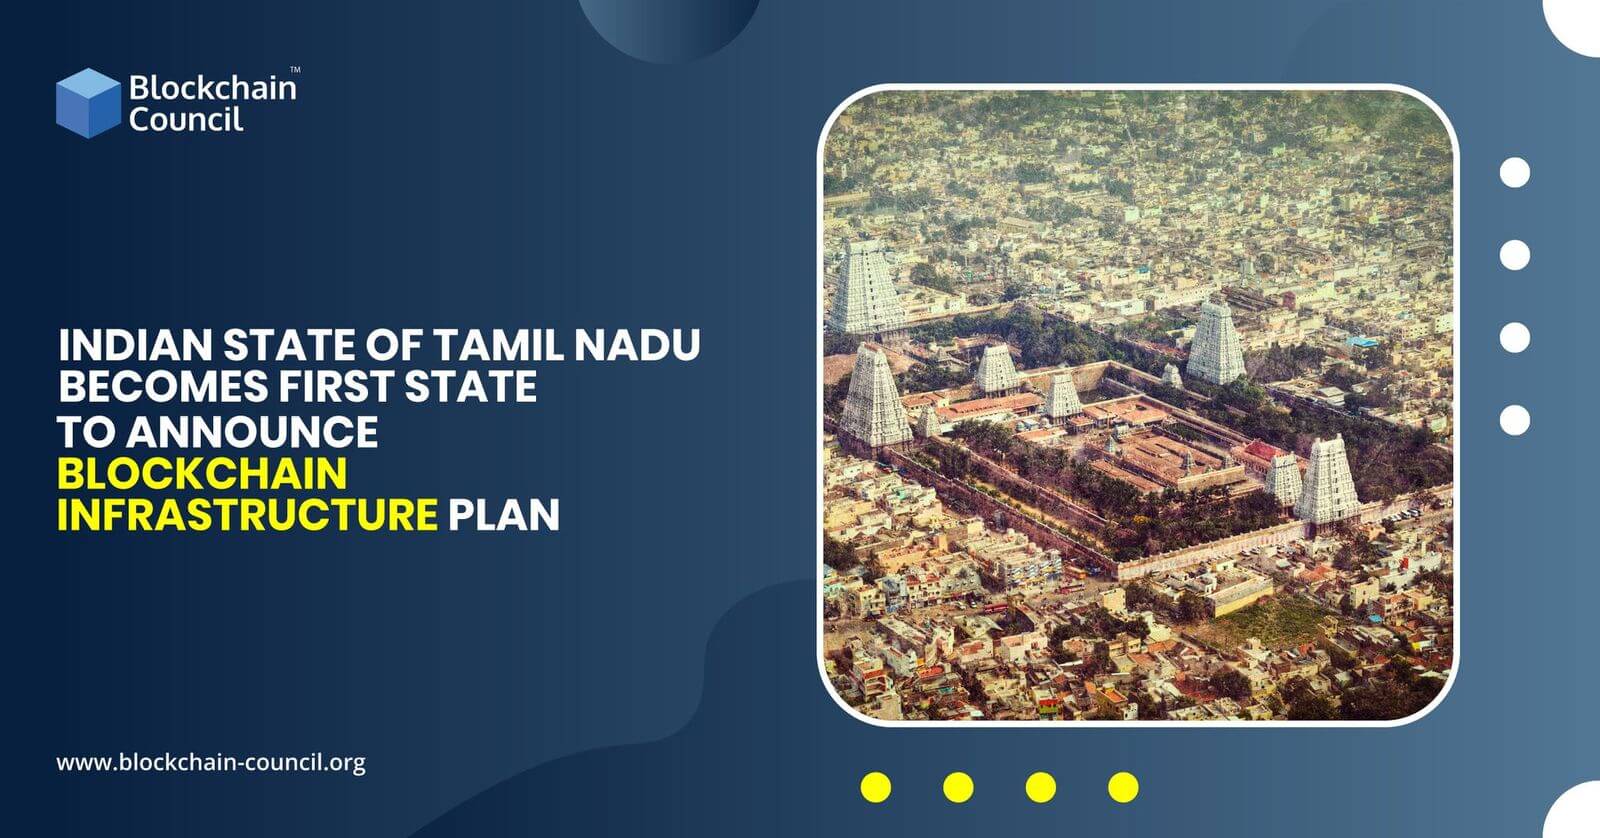 Indian State of Tamil Nadu Becomes First State to Announce Blockchain Infrastructure Plan